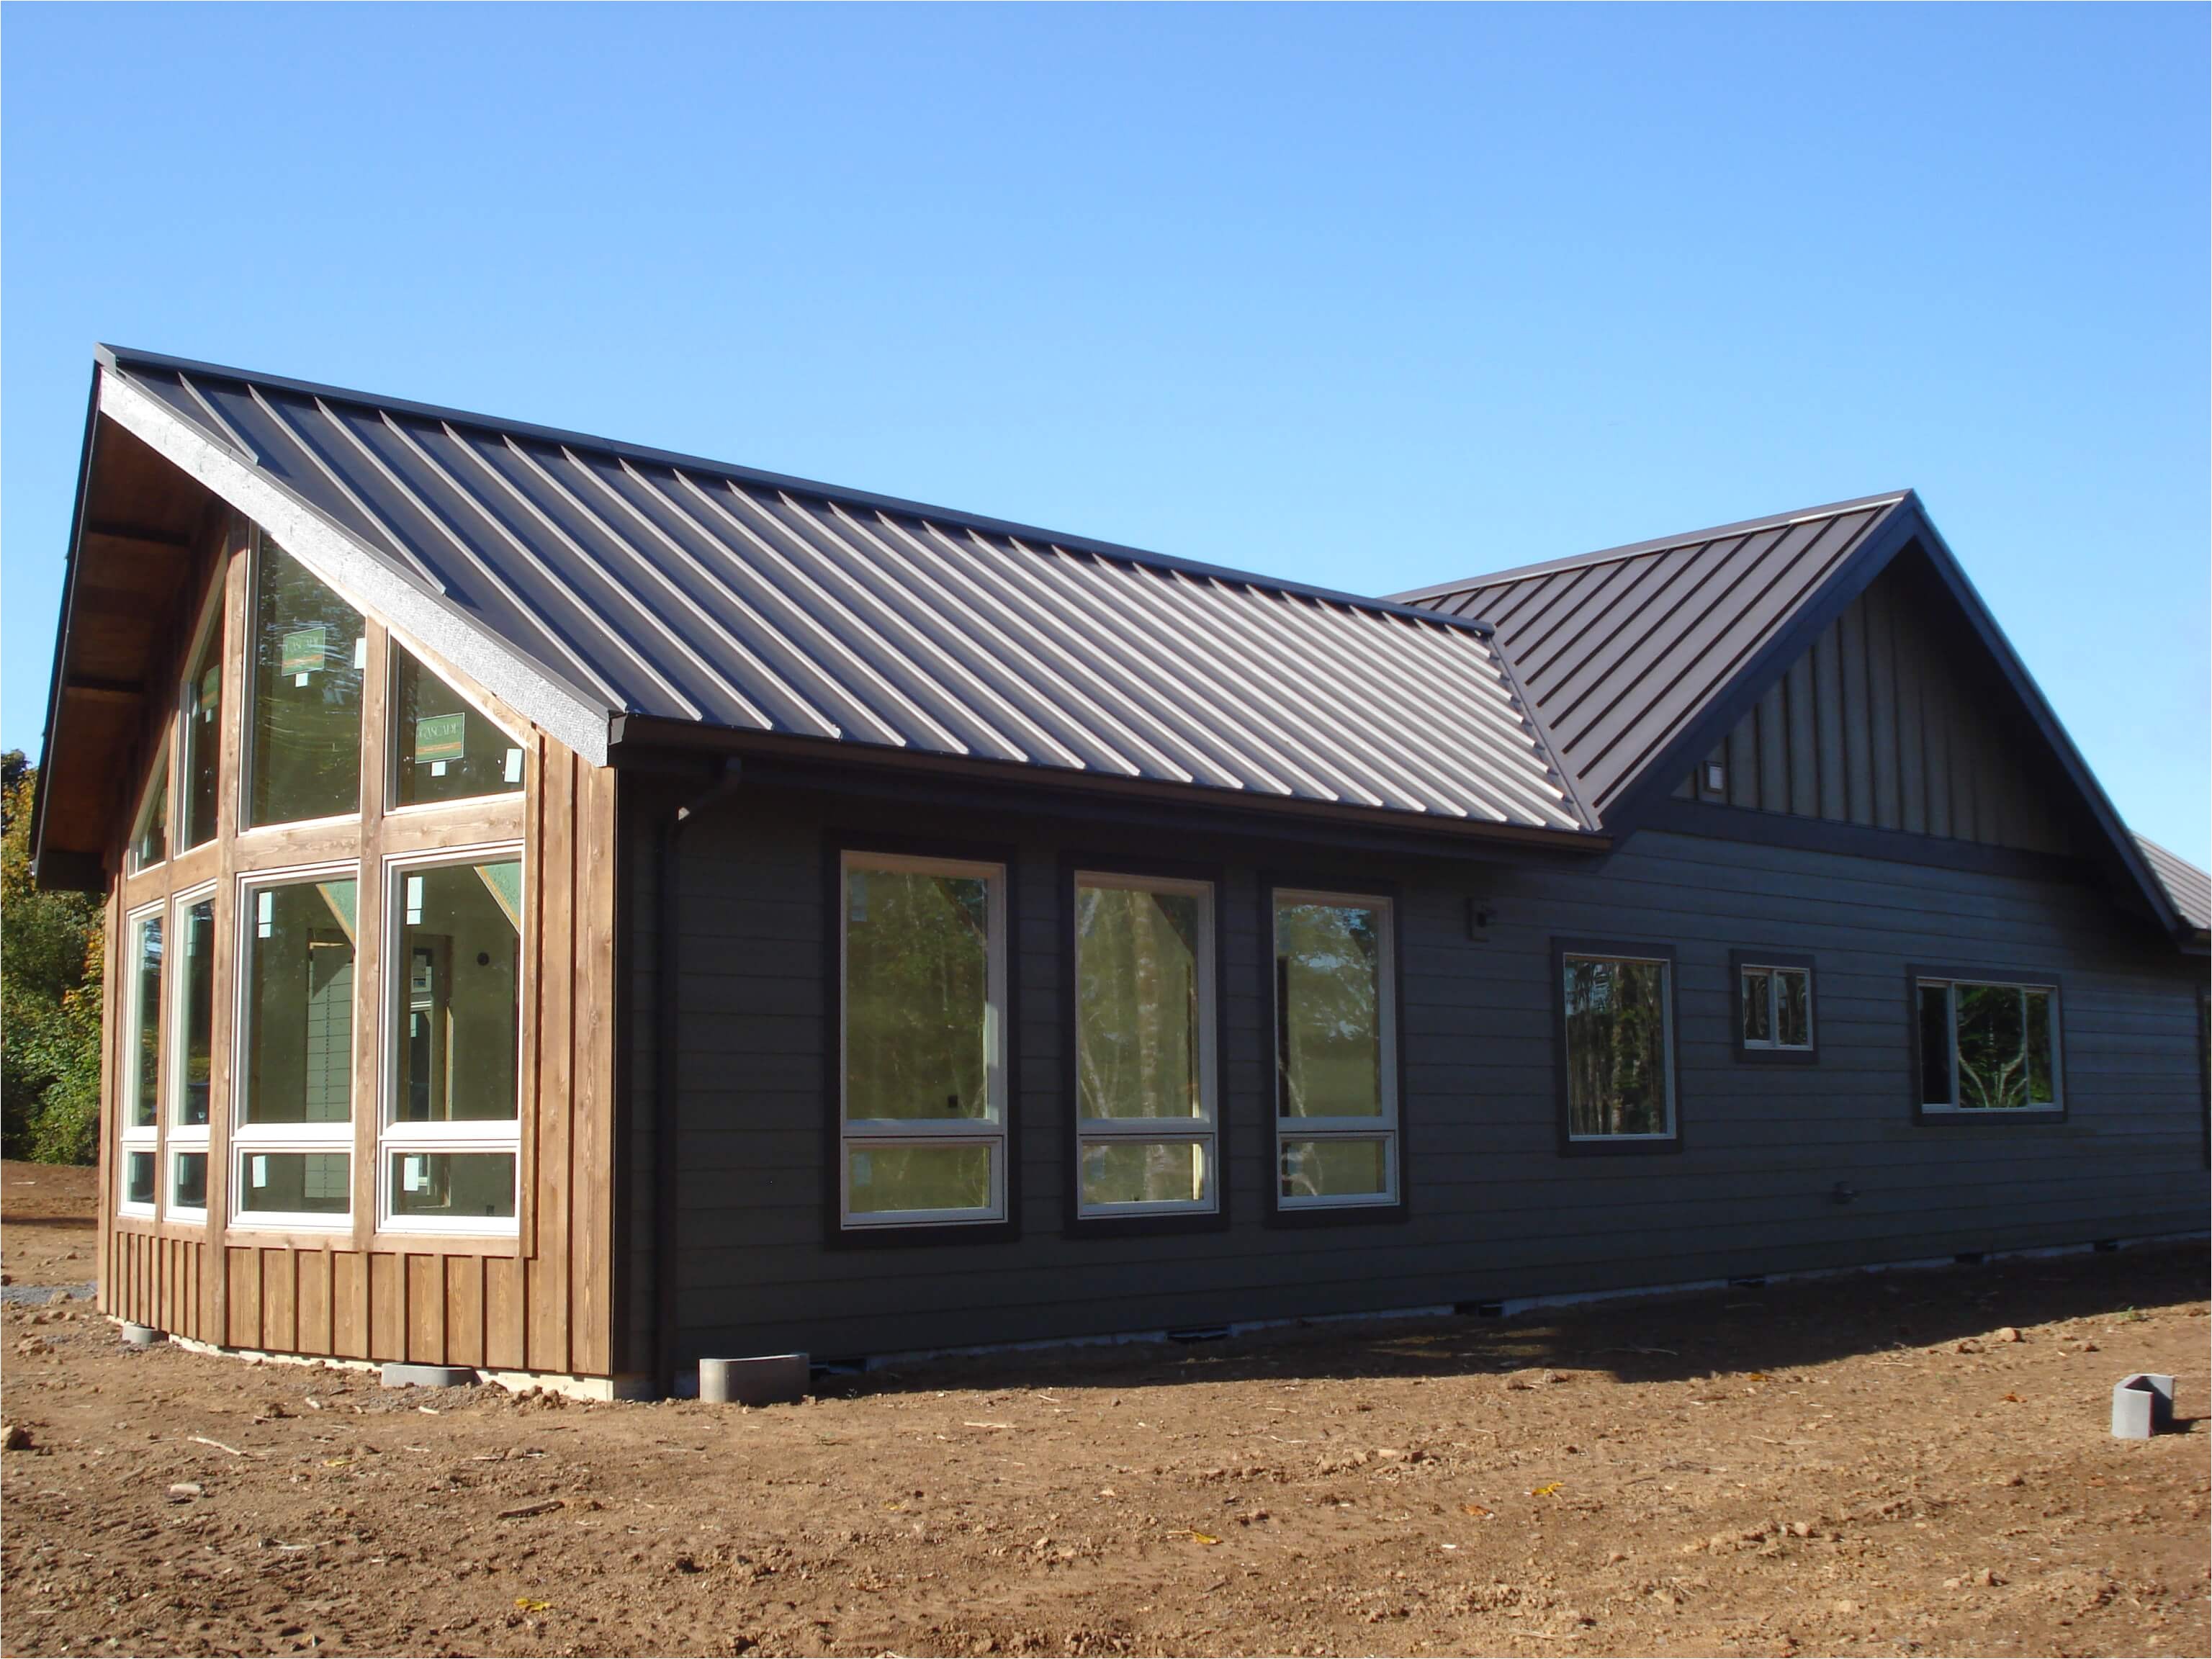 Metal Barn Home Plans Best Homes for Metal Roofing Aluminum Lock Roofing Inc